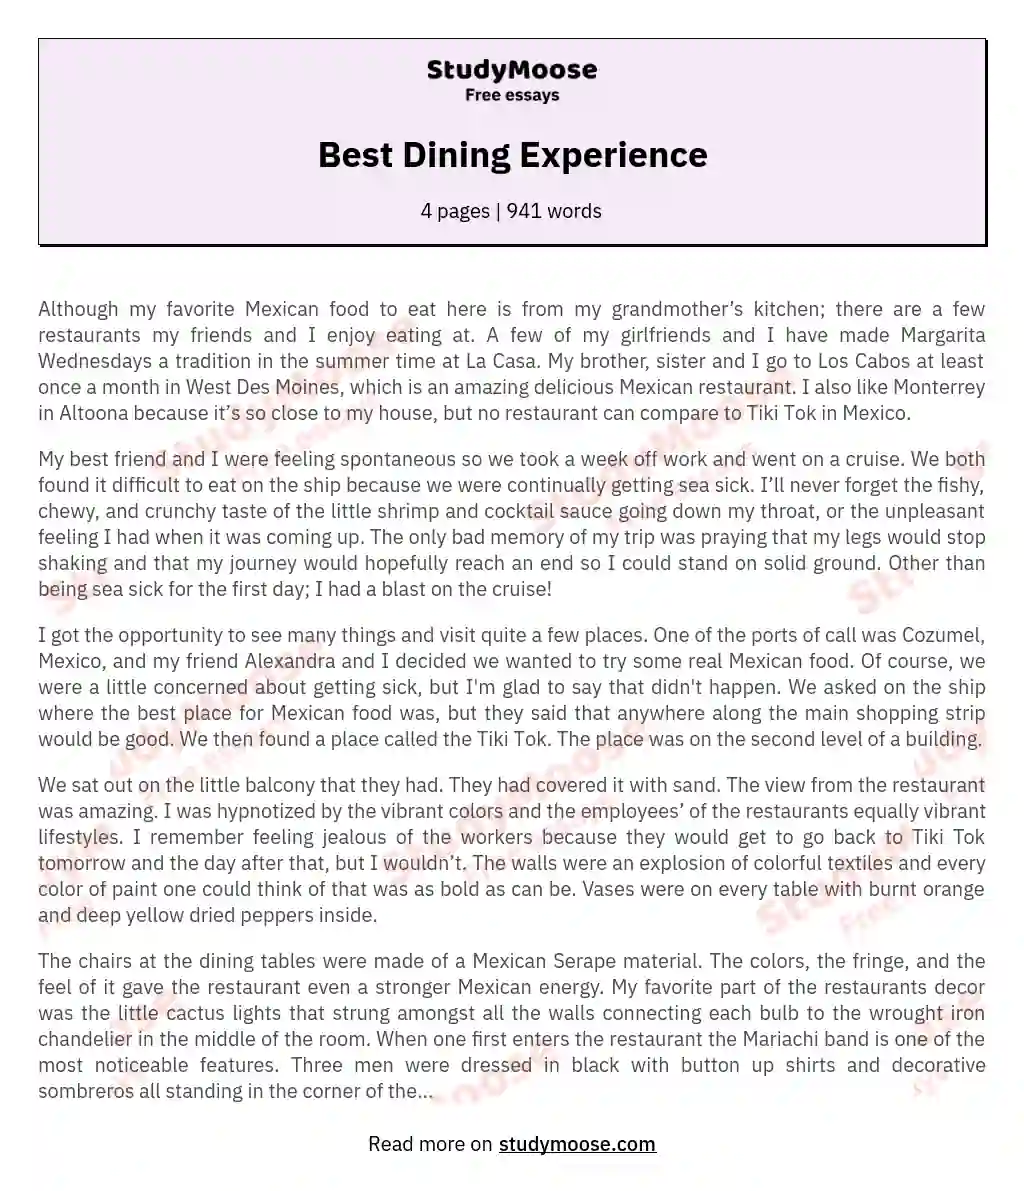 Best Dining Experience essay